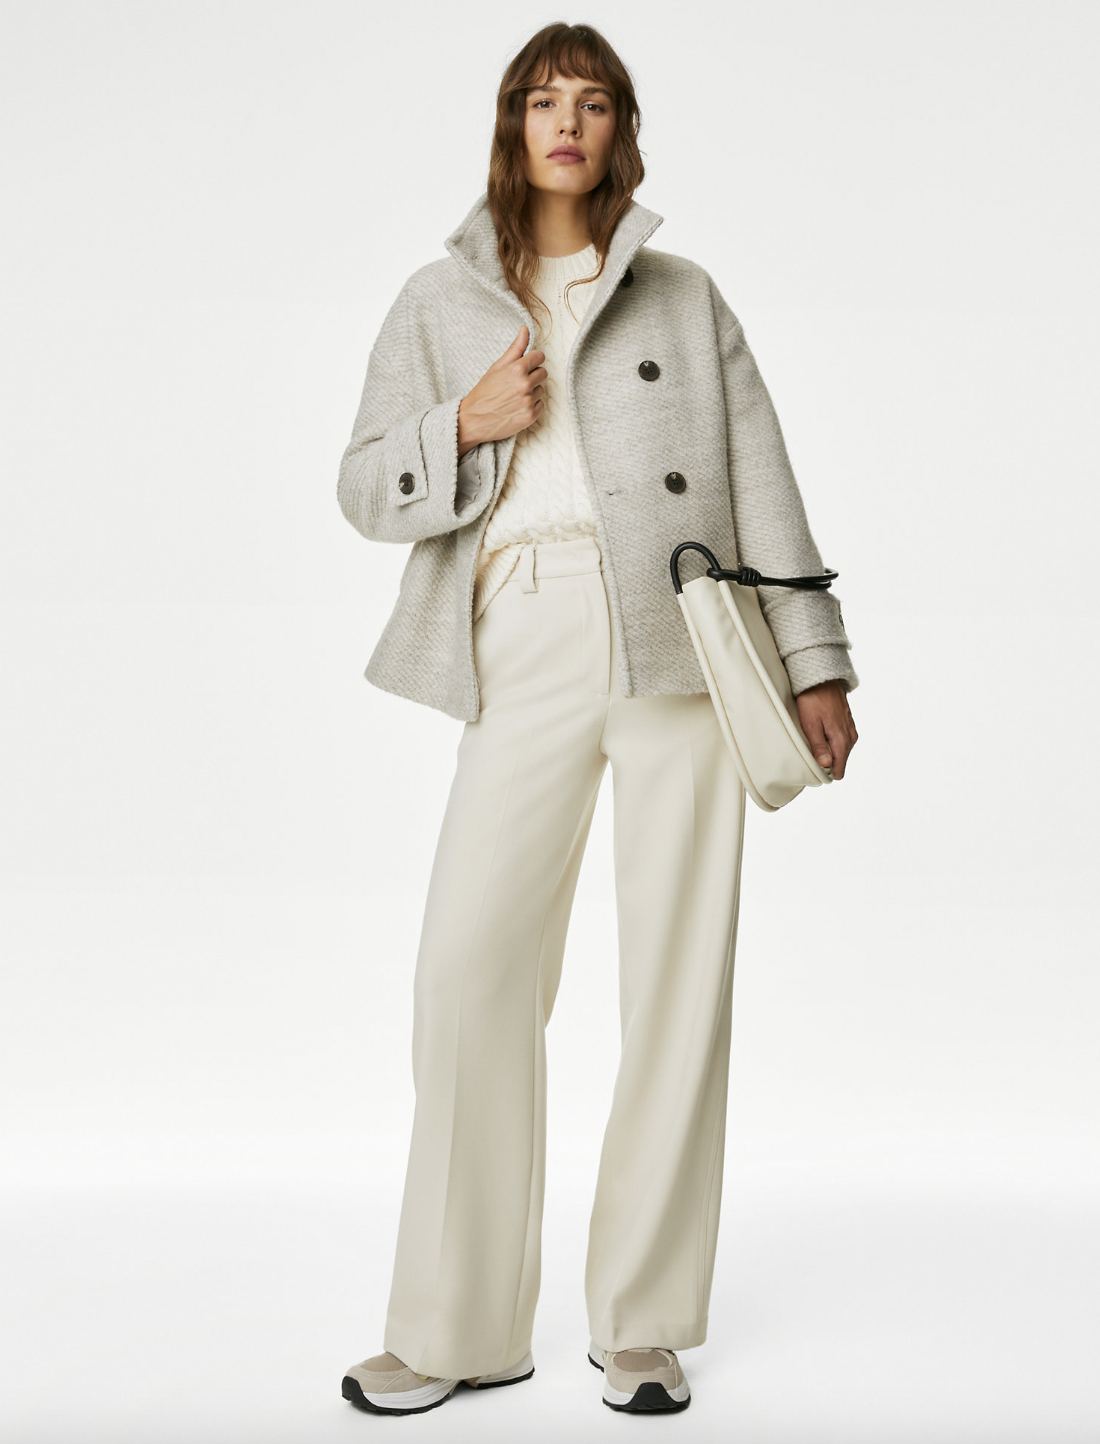 Opt for the ecru colour for a cosy tonal outfit when paired with a cream knit. (M&S)